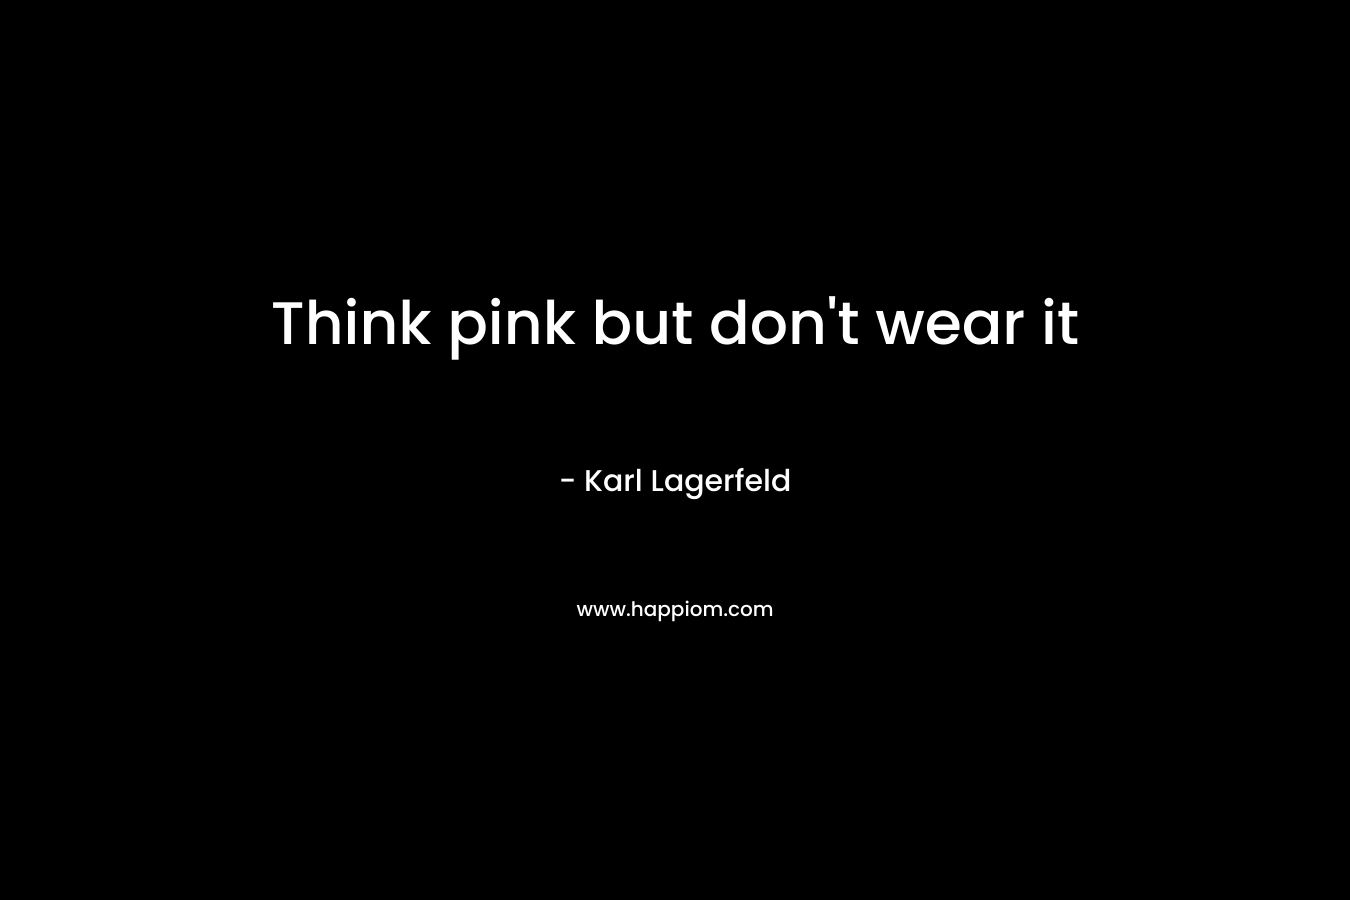 Think pink but don’t wear it – Karl Lagerfeld